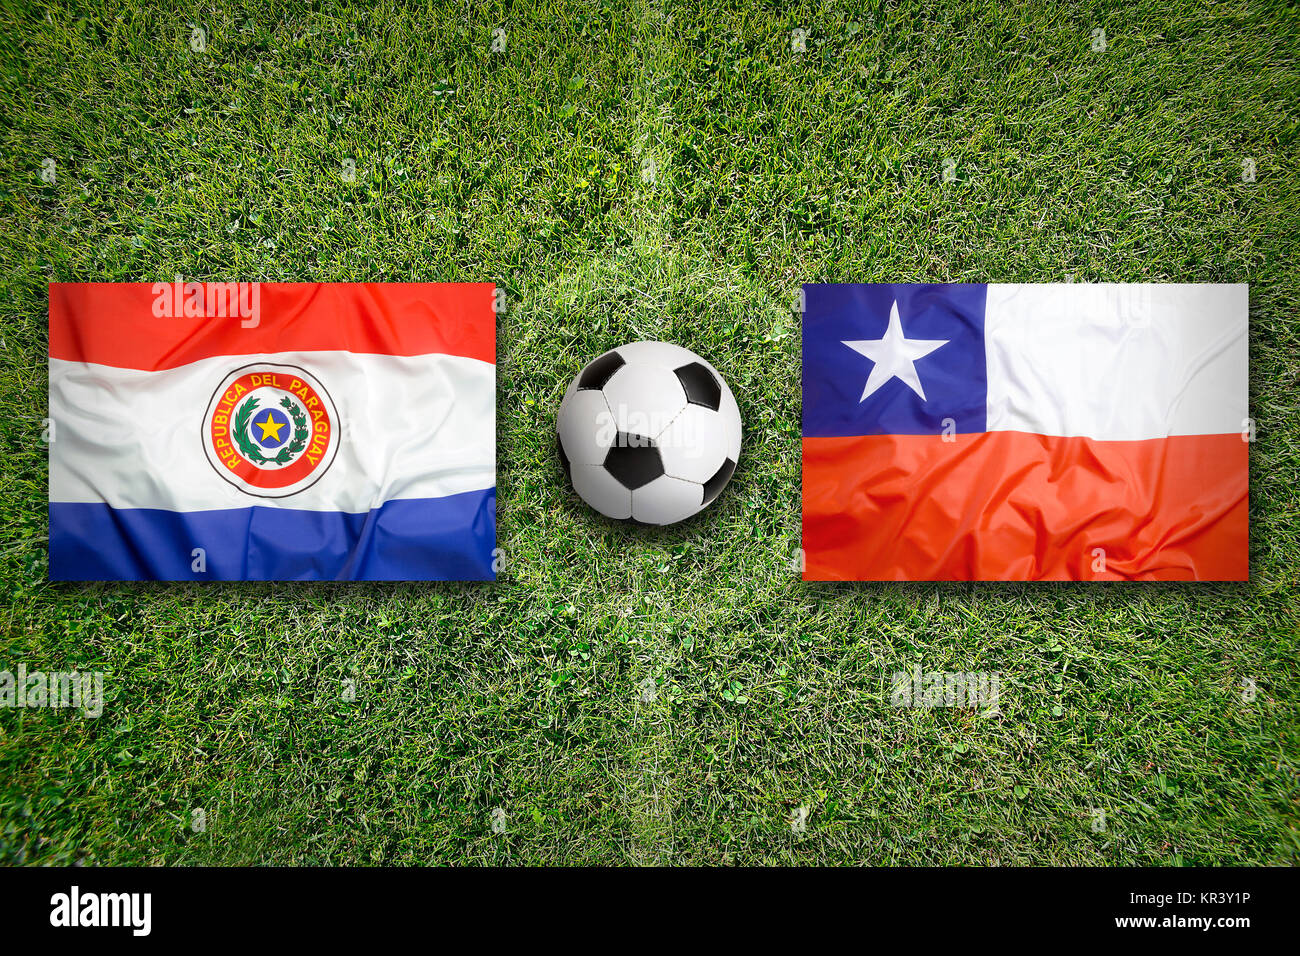 Paraguay vs. Chile flags on soccer field Stock Photo Alamy